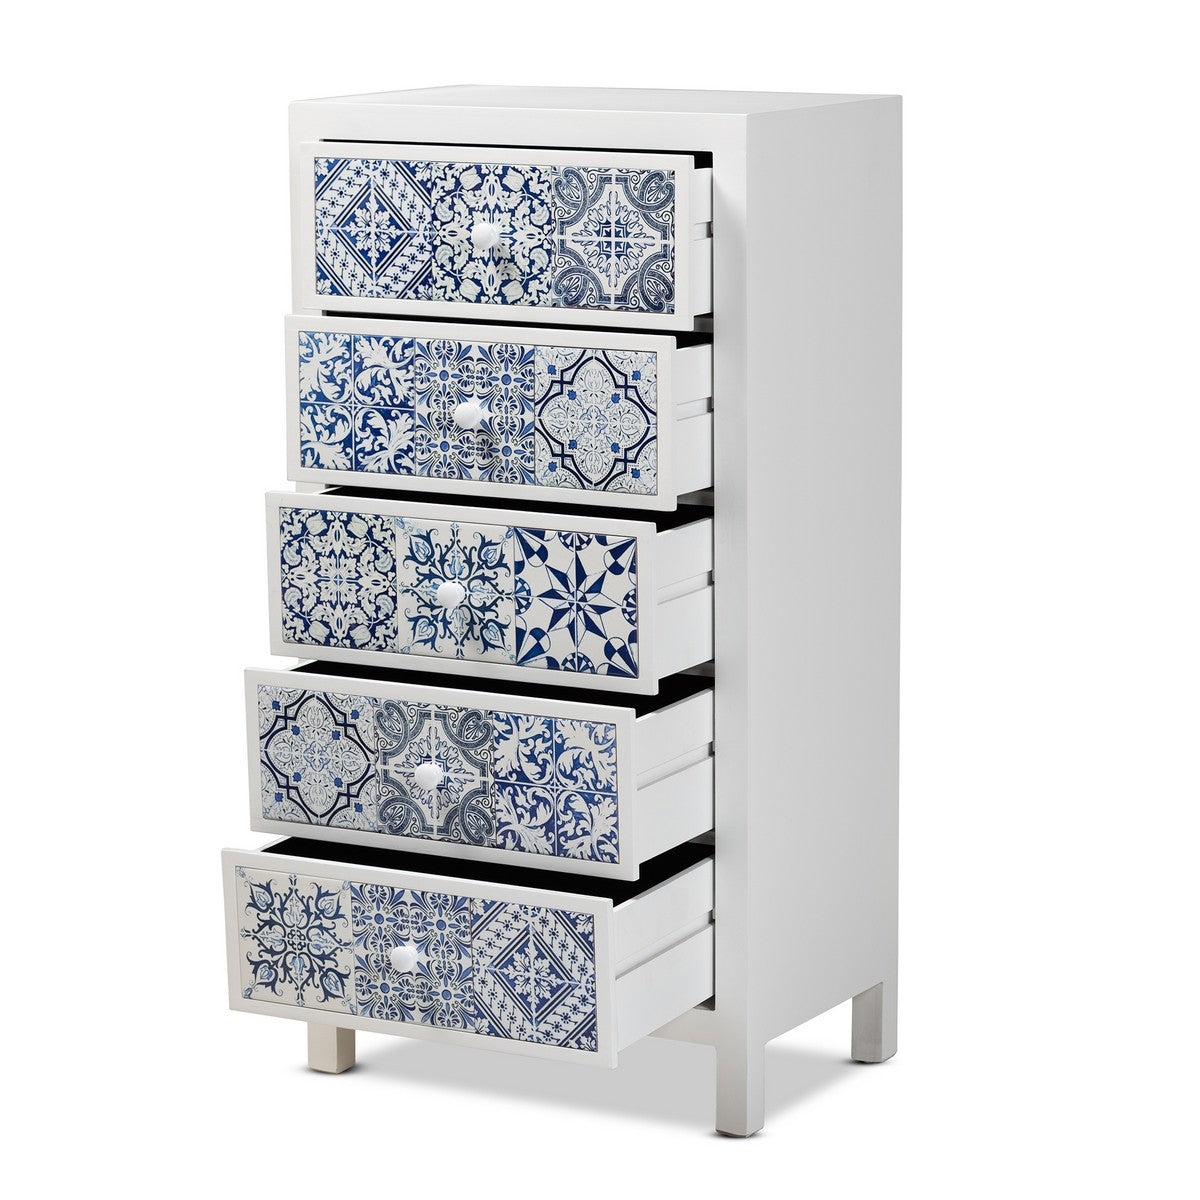 Baxton Studio Alma Spanish Mediterranean Inspired White Wood and Blue Floral Tile Style 5-Drawer Accent Chest